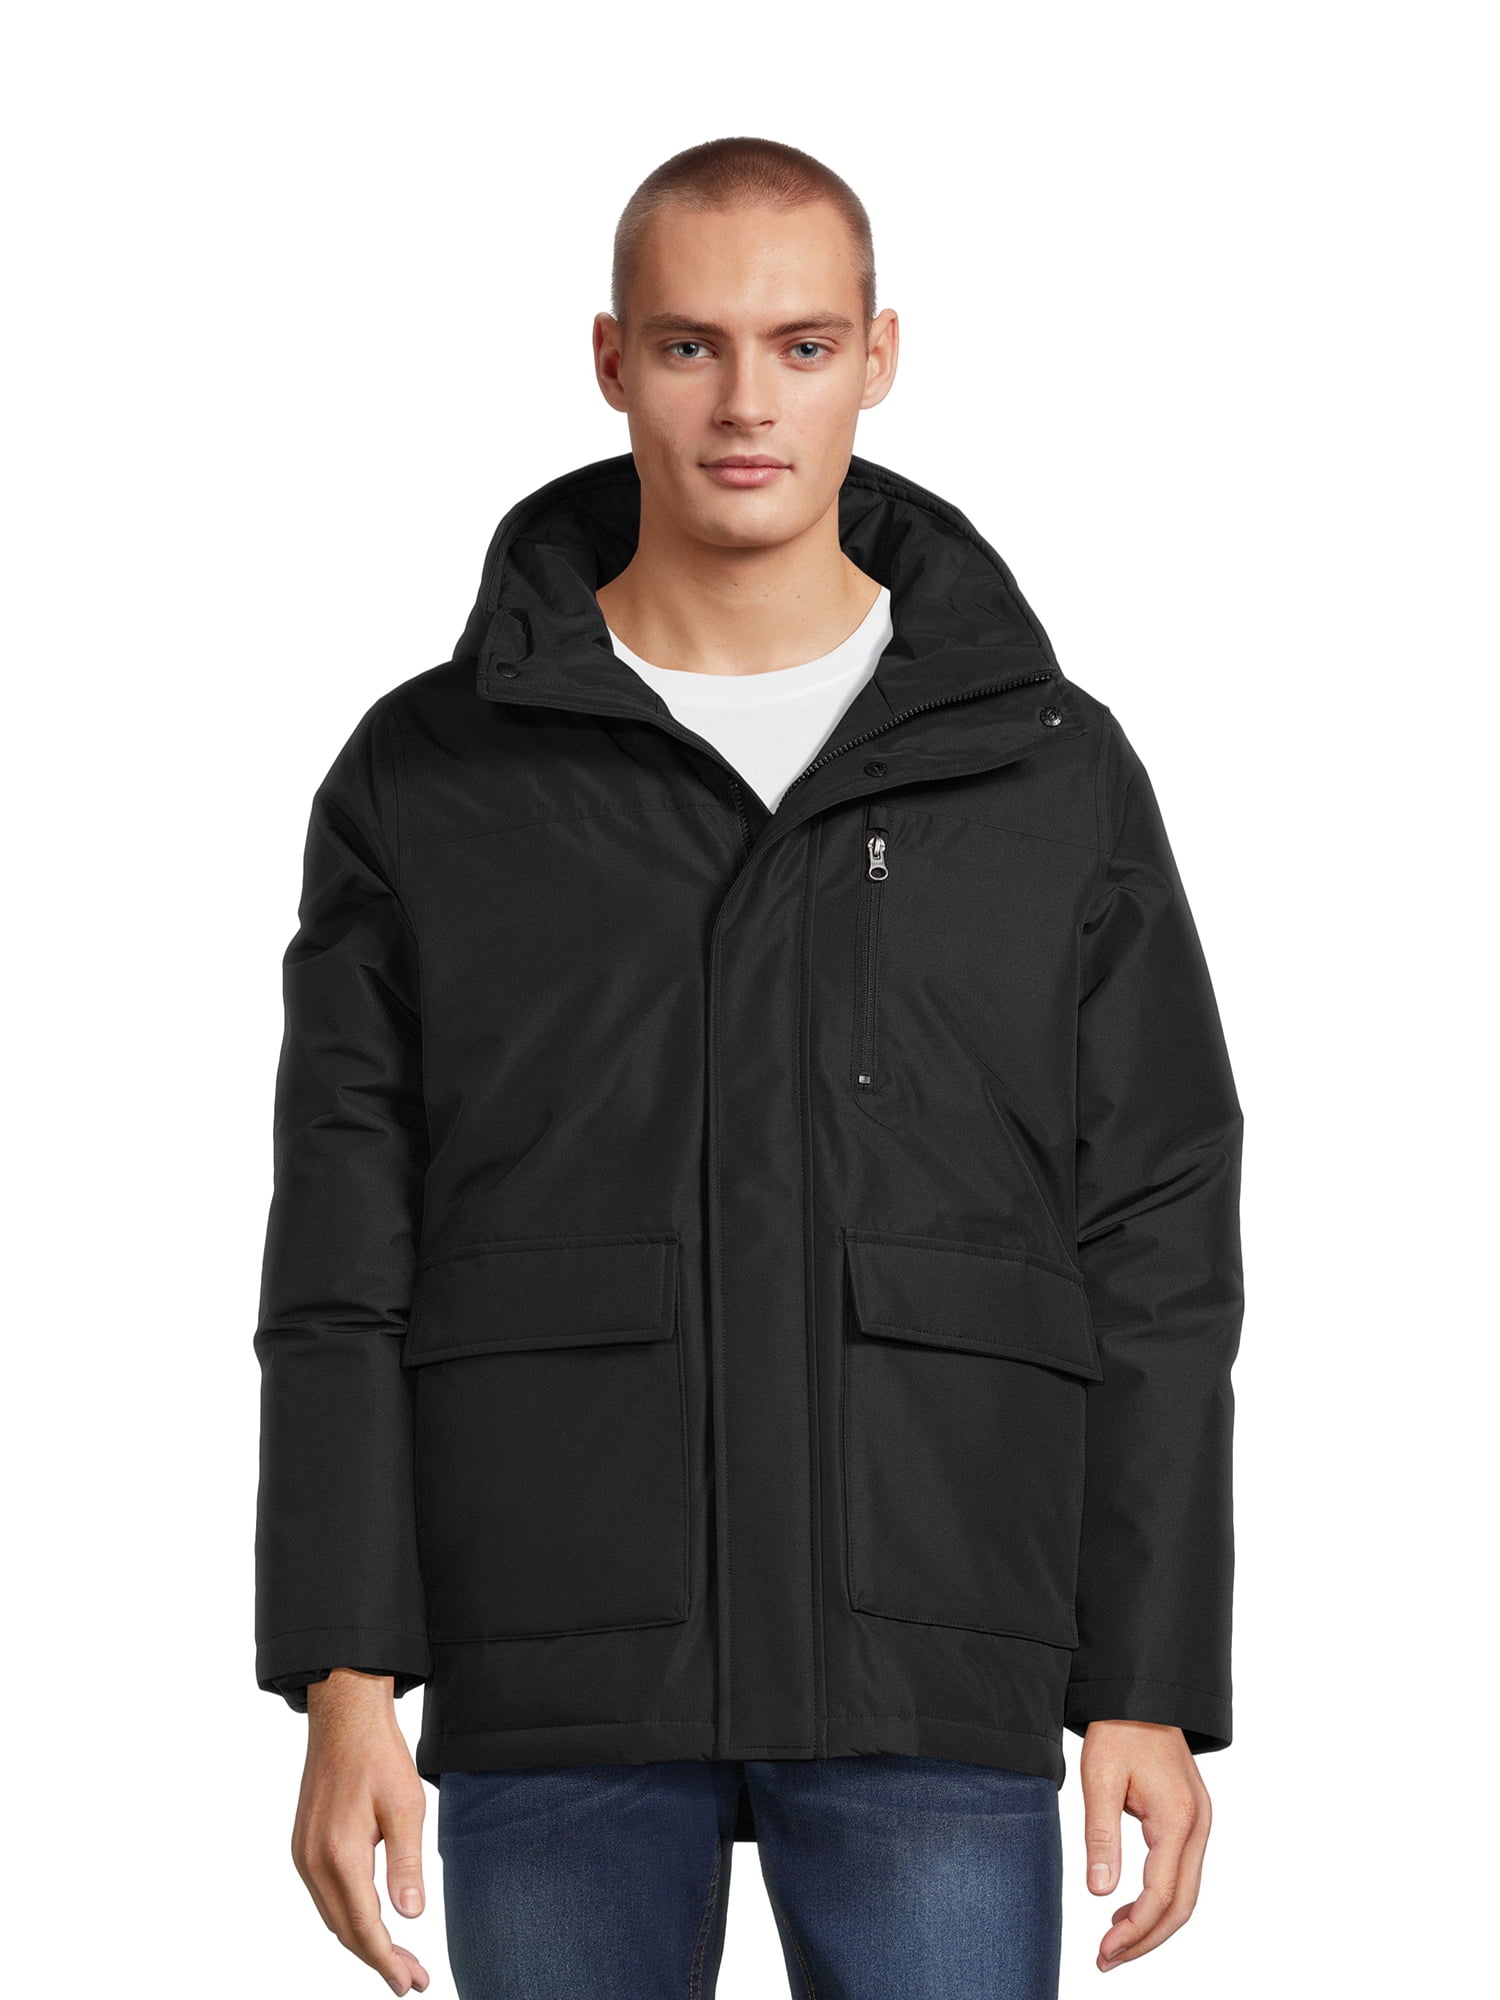 Swiss Tech Men's Water Resistant Midweight Jacket with Hood, Sizes S ...